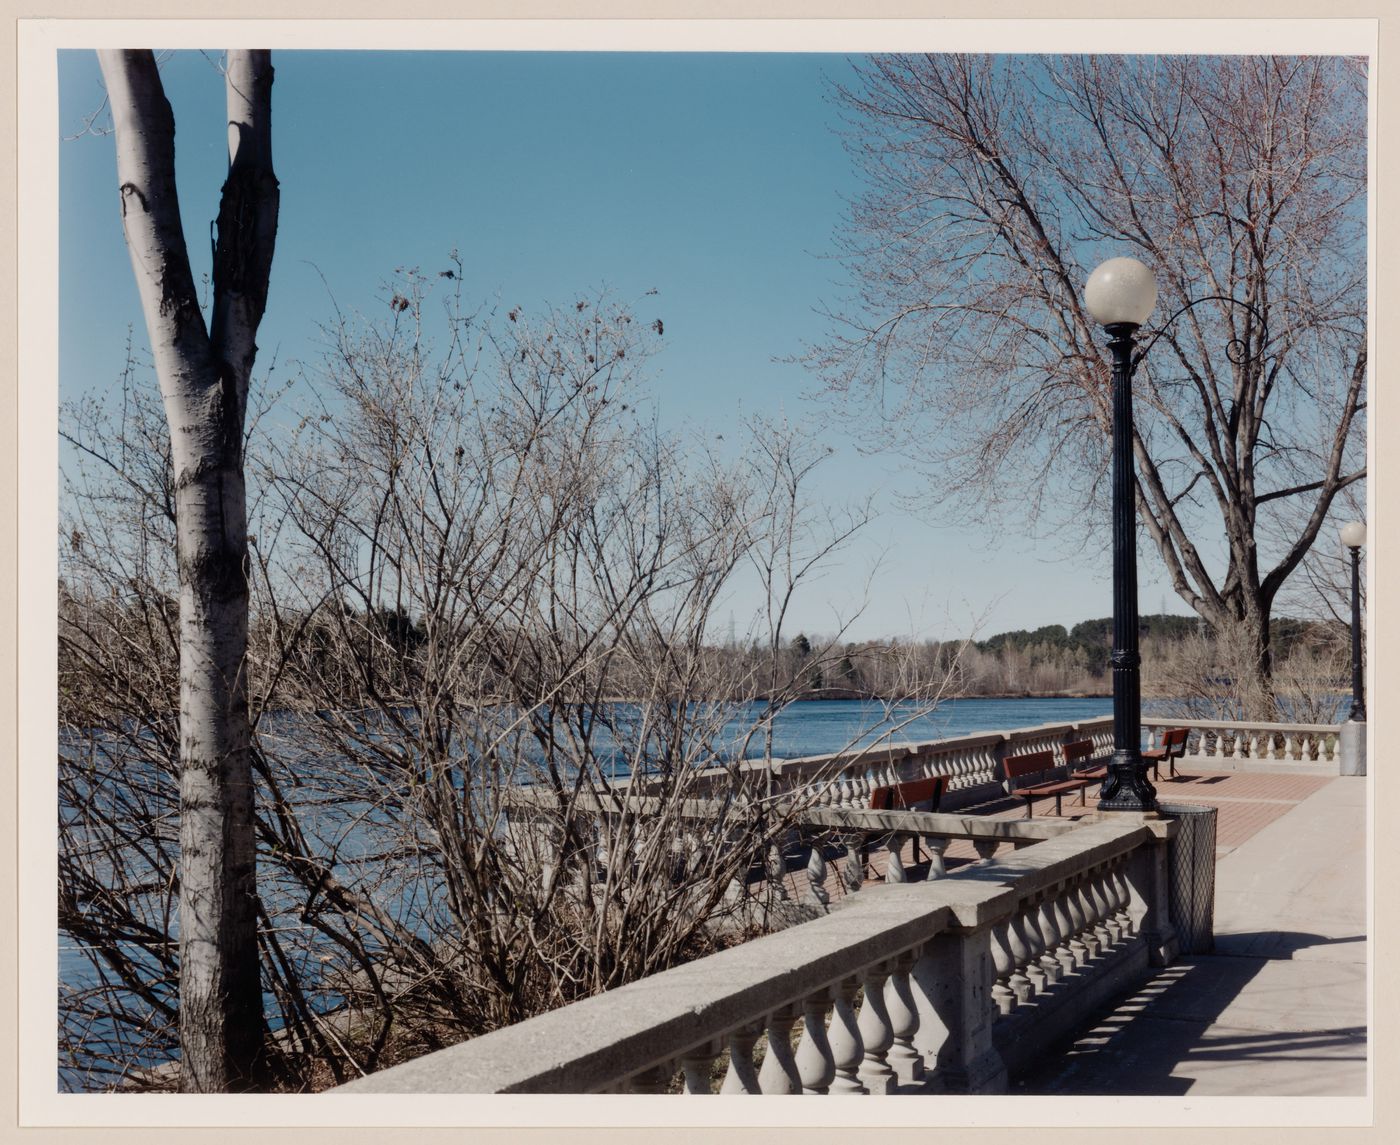 Section 1 of 2 of Panorama of lookout on the Saint-Maurice promenade, looking west, Shawinigan, Quebec